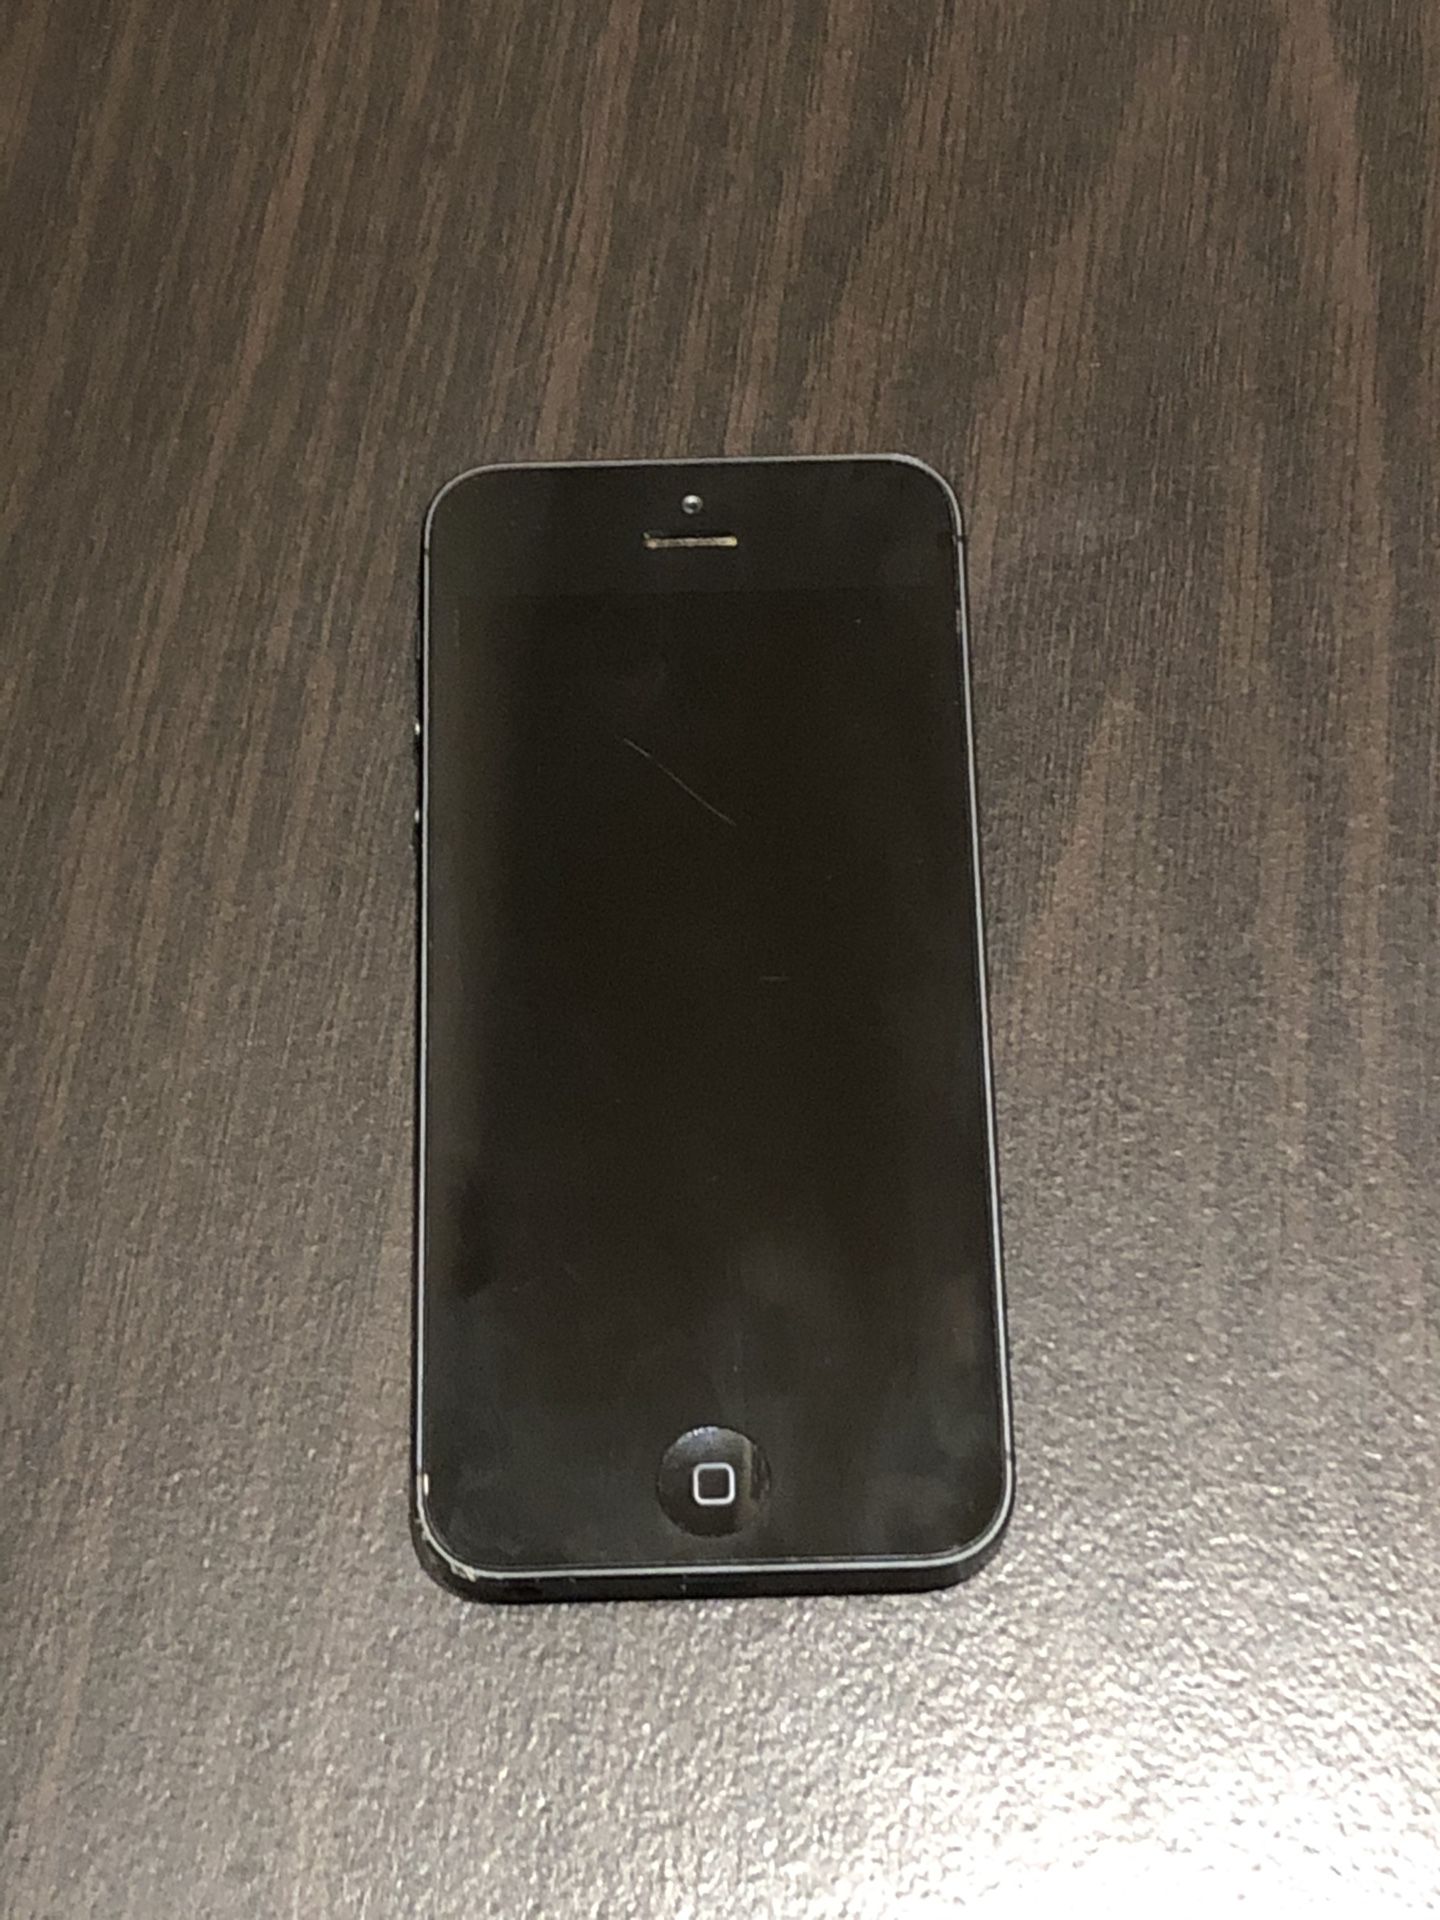 iPhone 5 (Factory Unlocked) WORKS PERFECT!